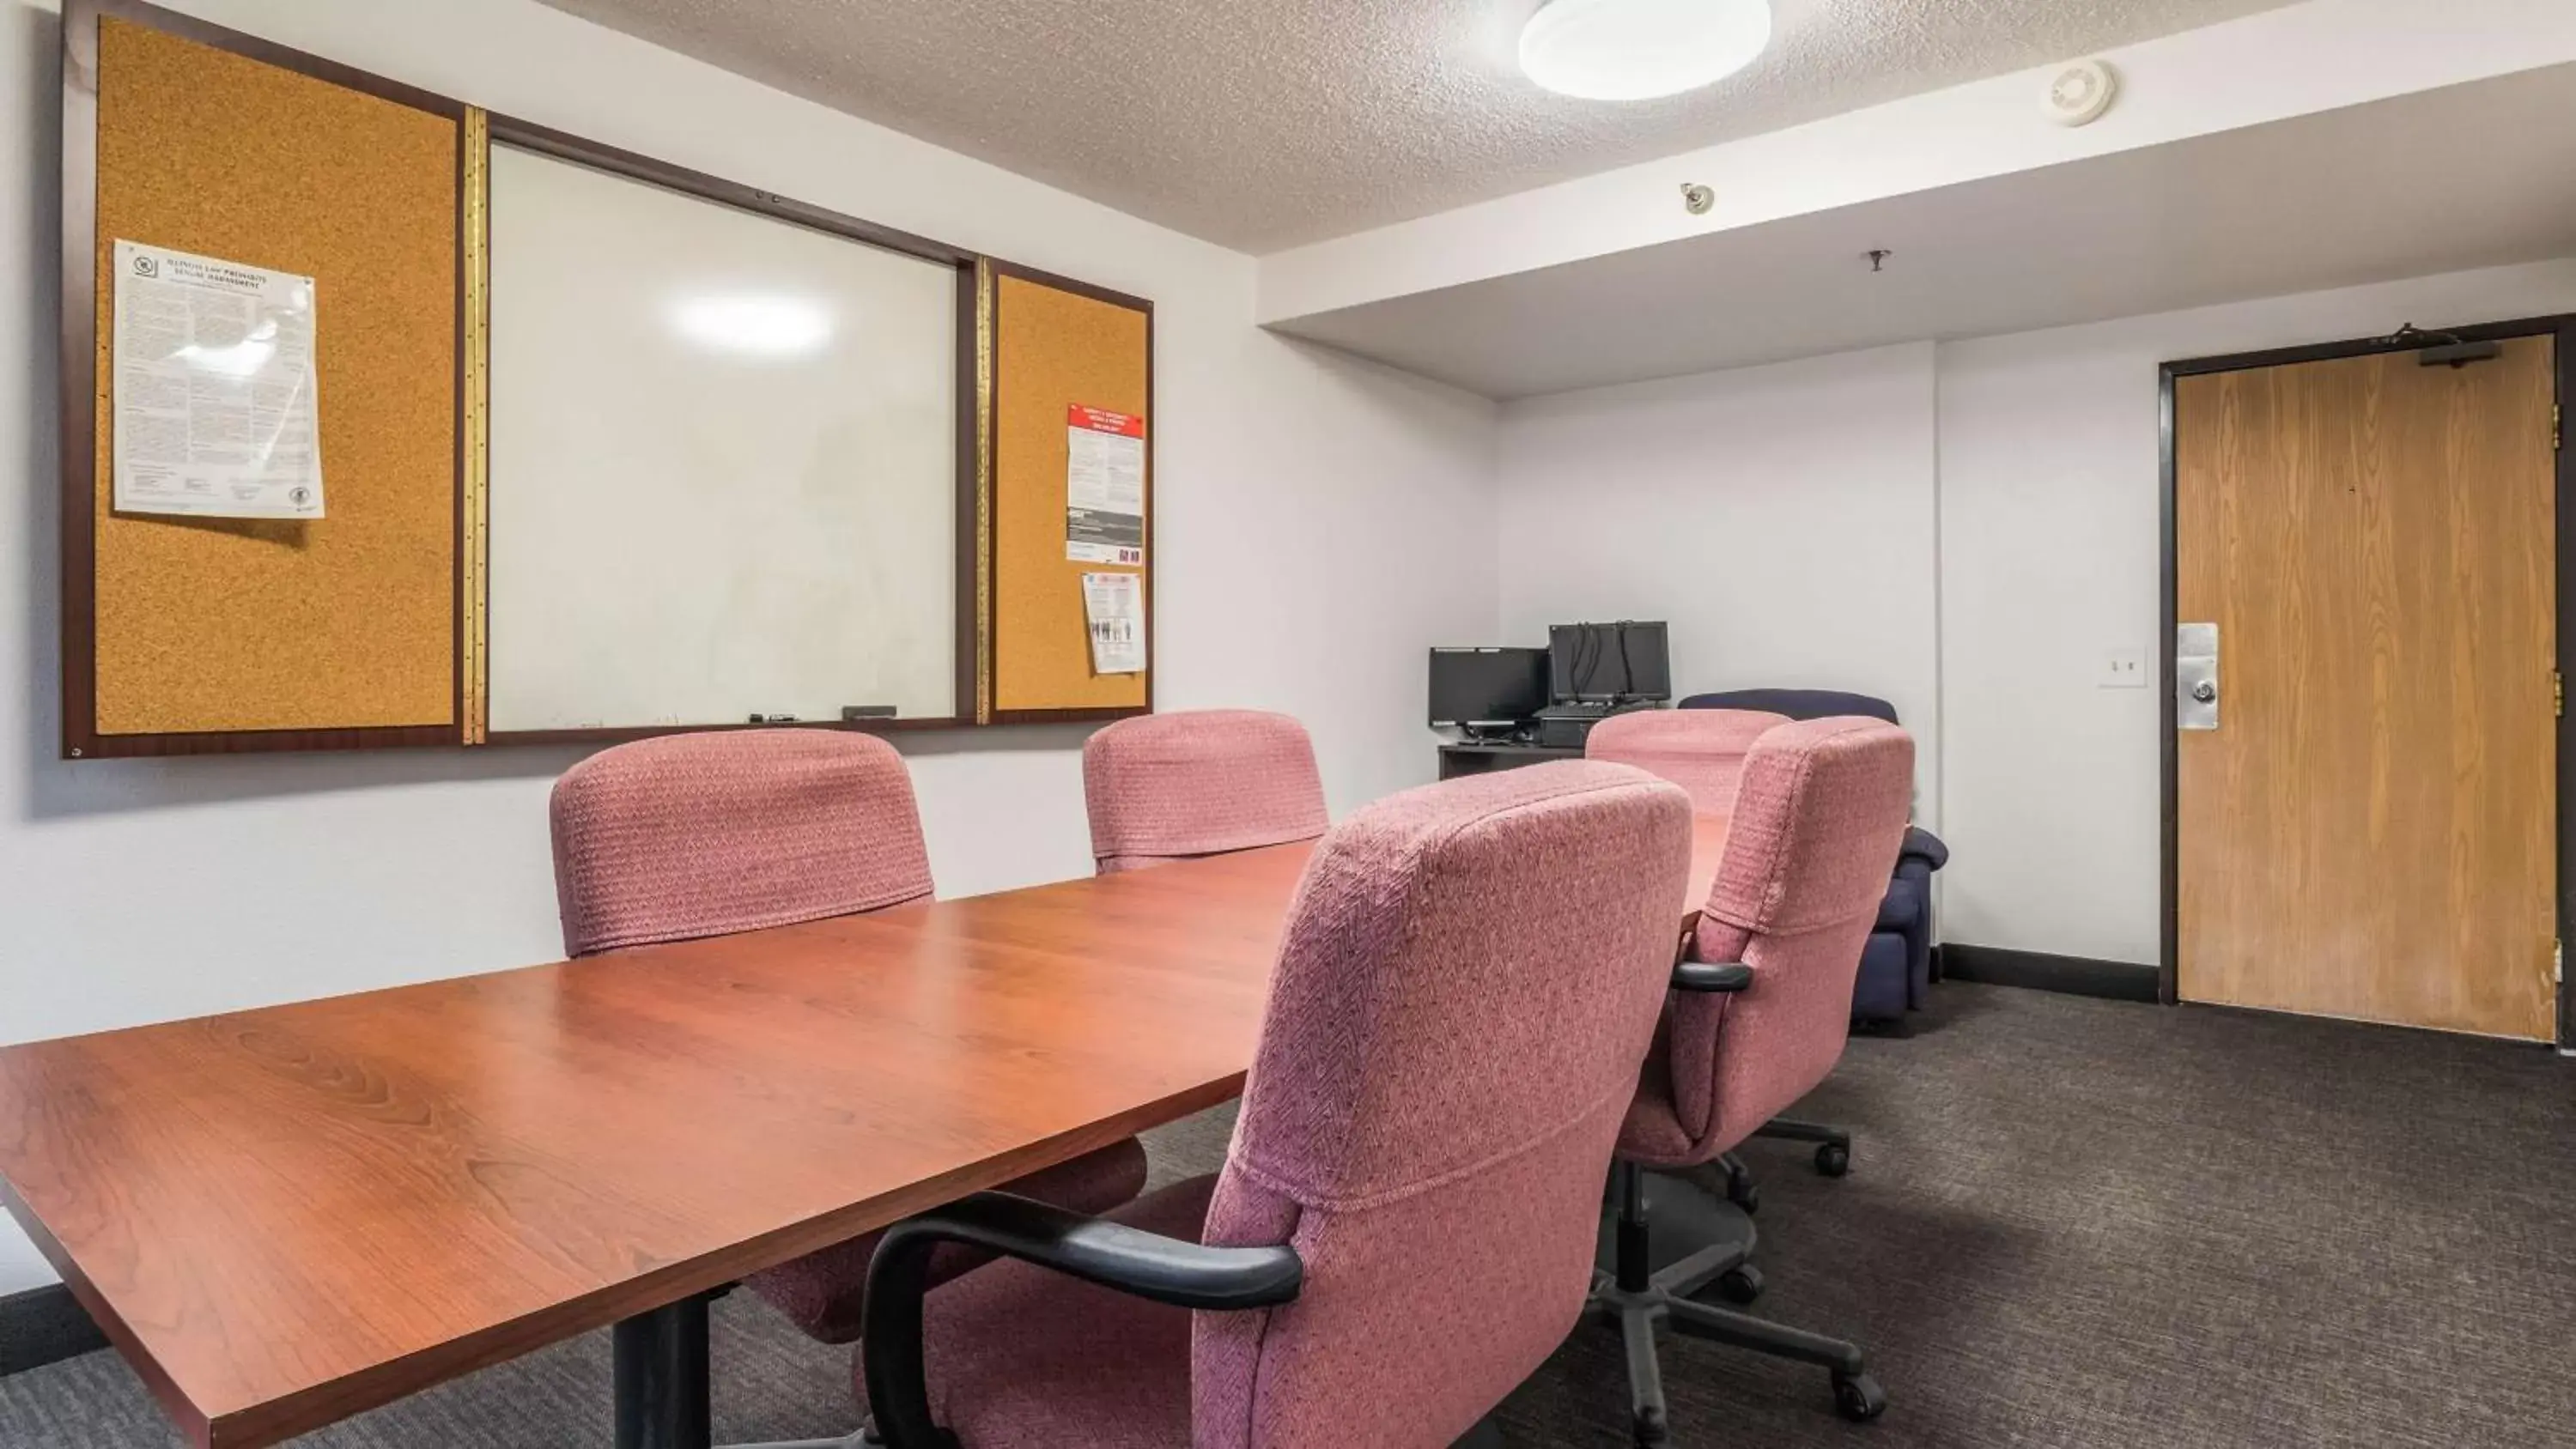 Meeting/conference room in Motel 6-Elk Grove Village, IL